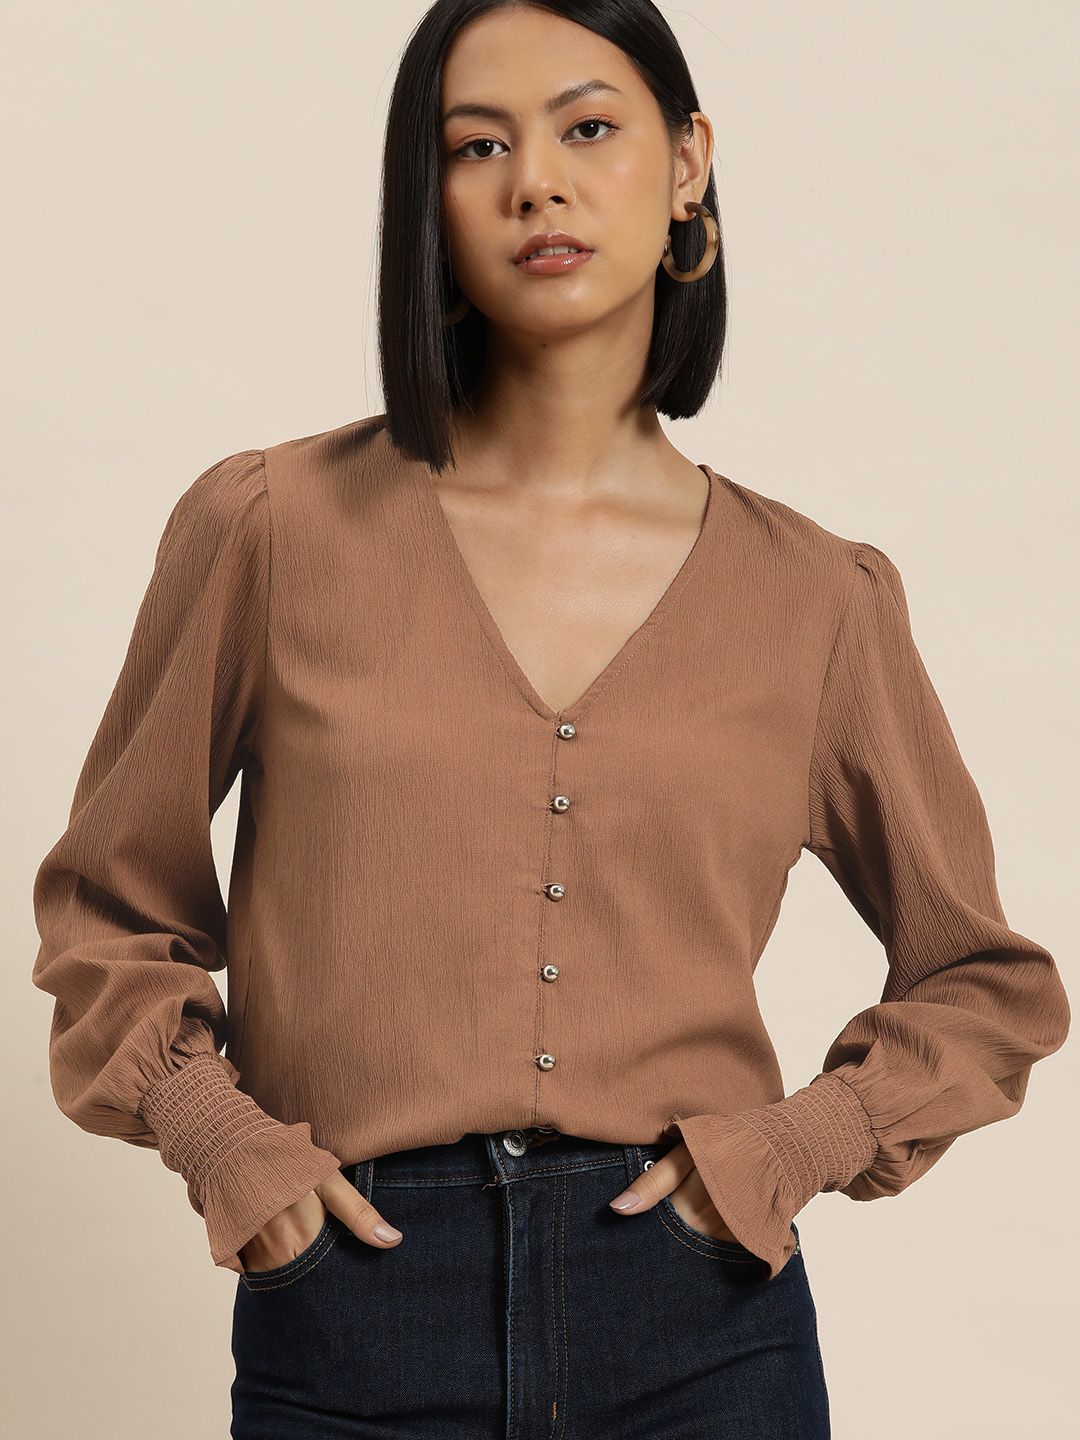 INVICTUS Puff Sleeve Crepe Shirt Style Top Price in India